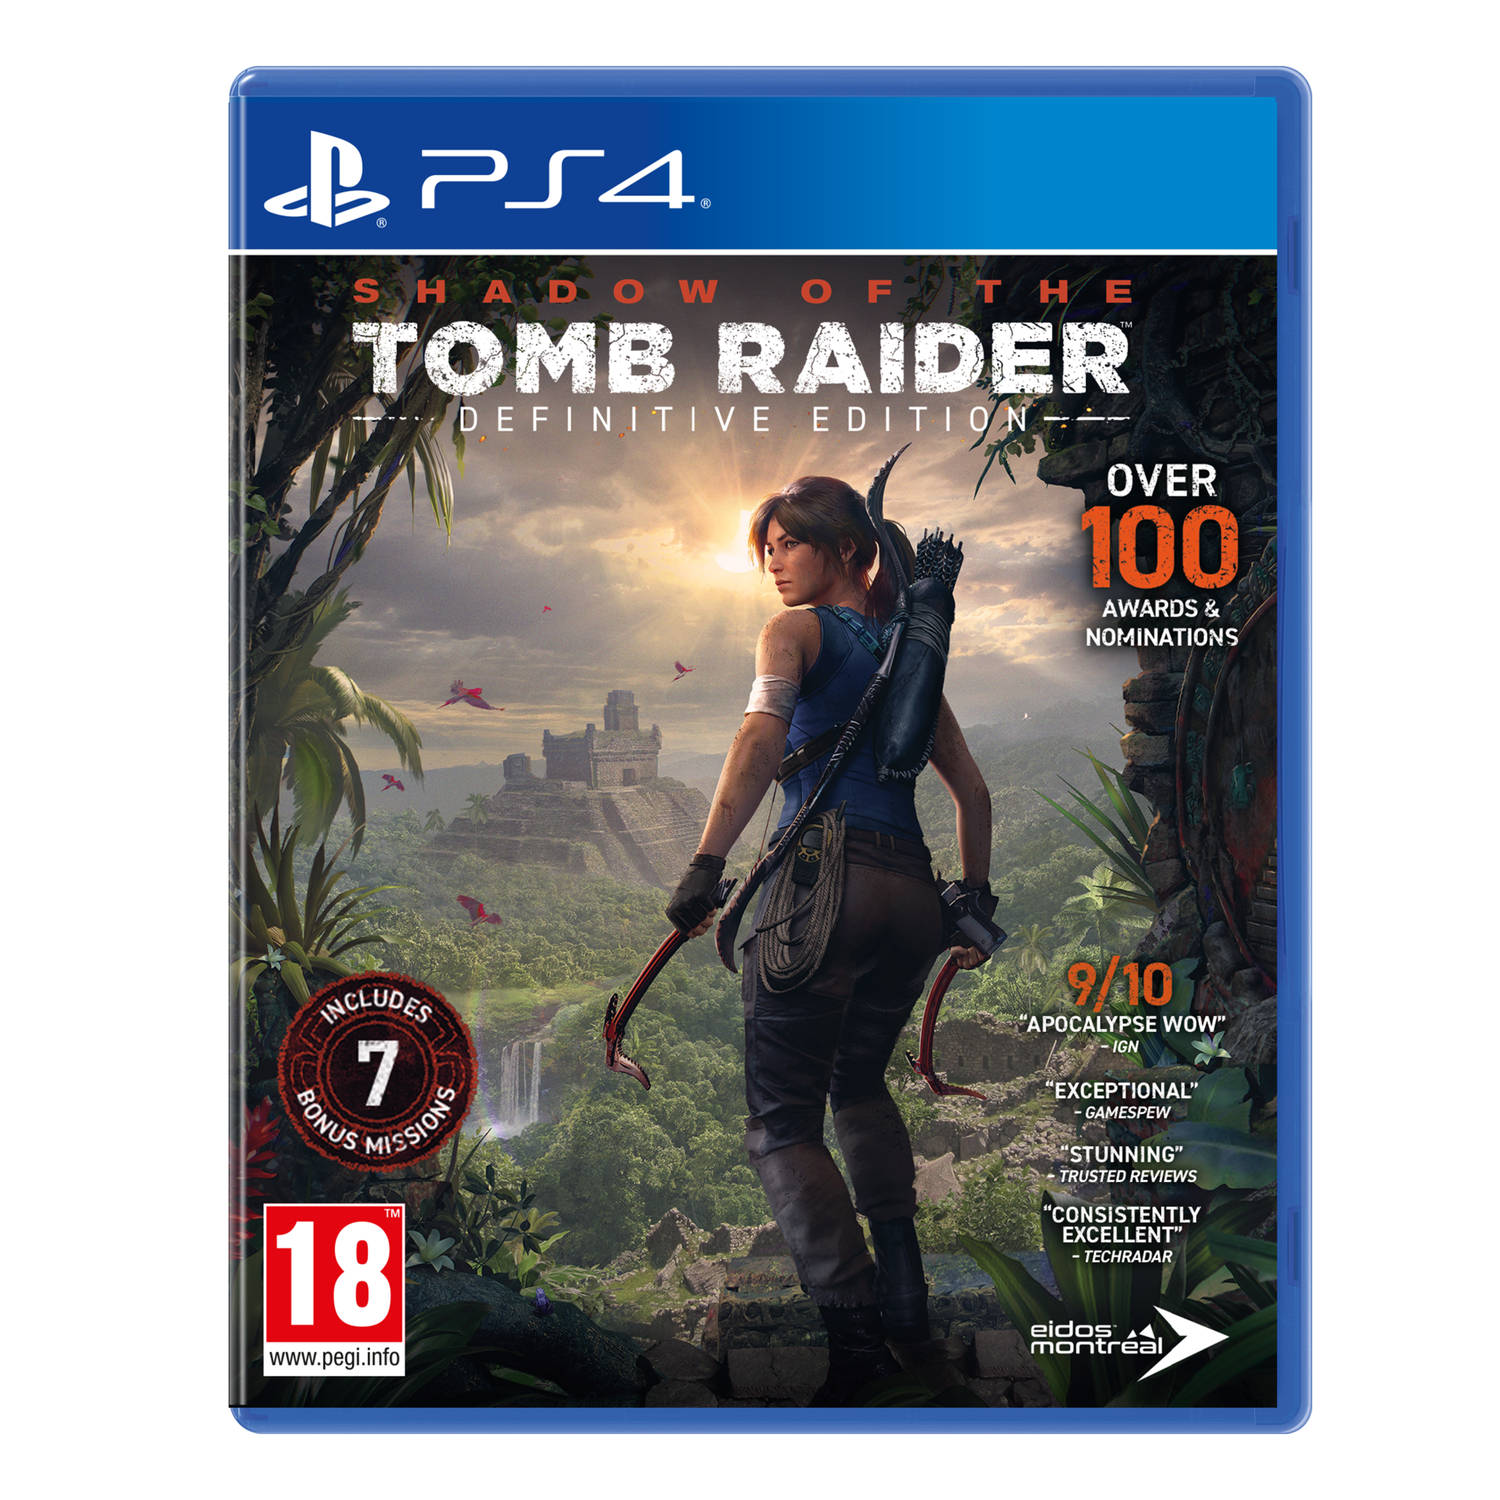 Shadow of the tomb raider (Definitive edition), (Playstation 4). PS4